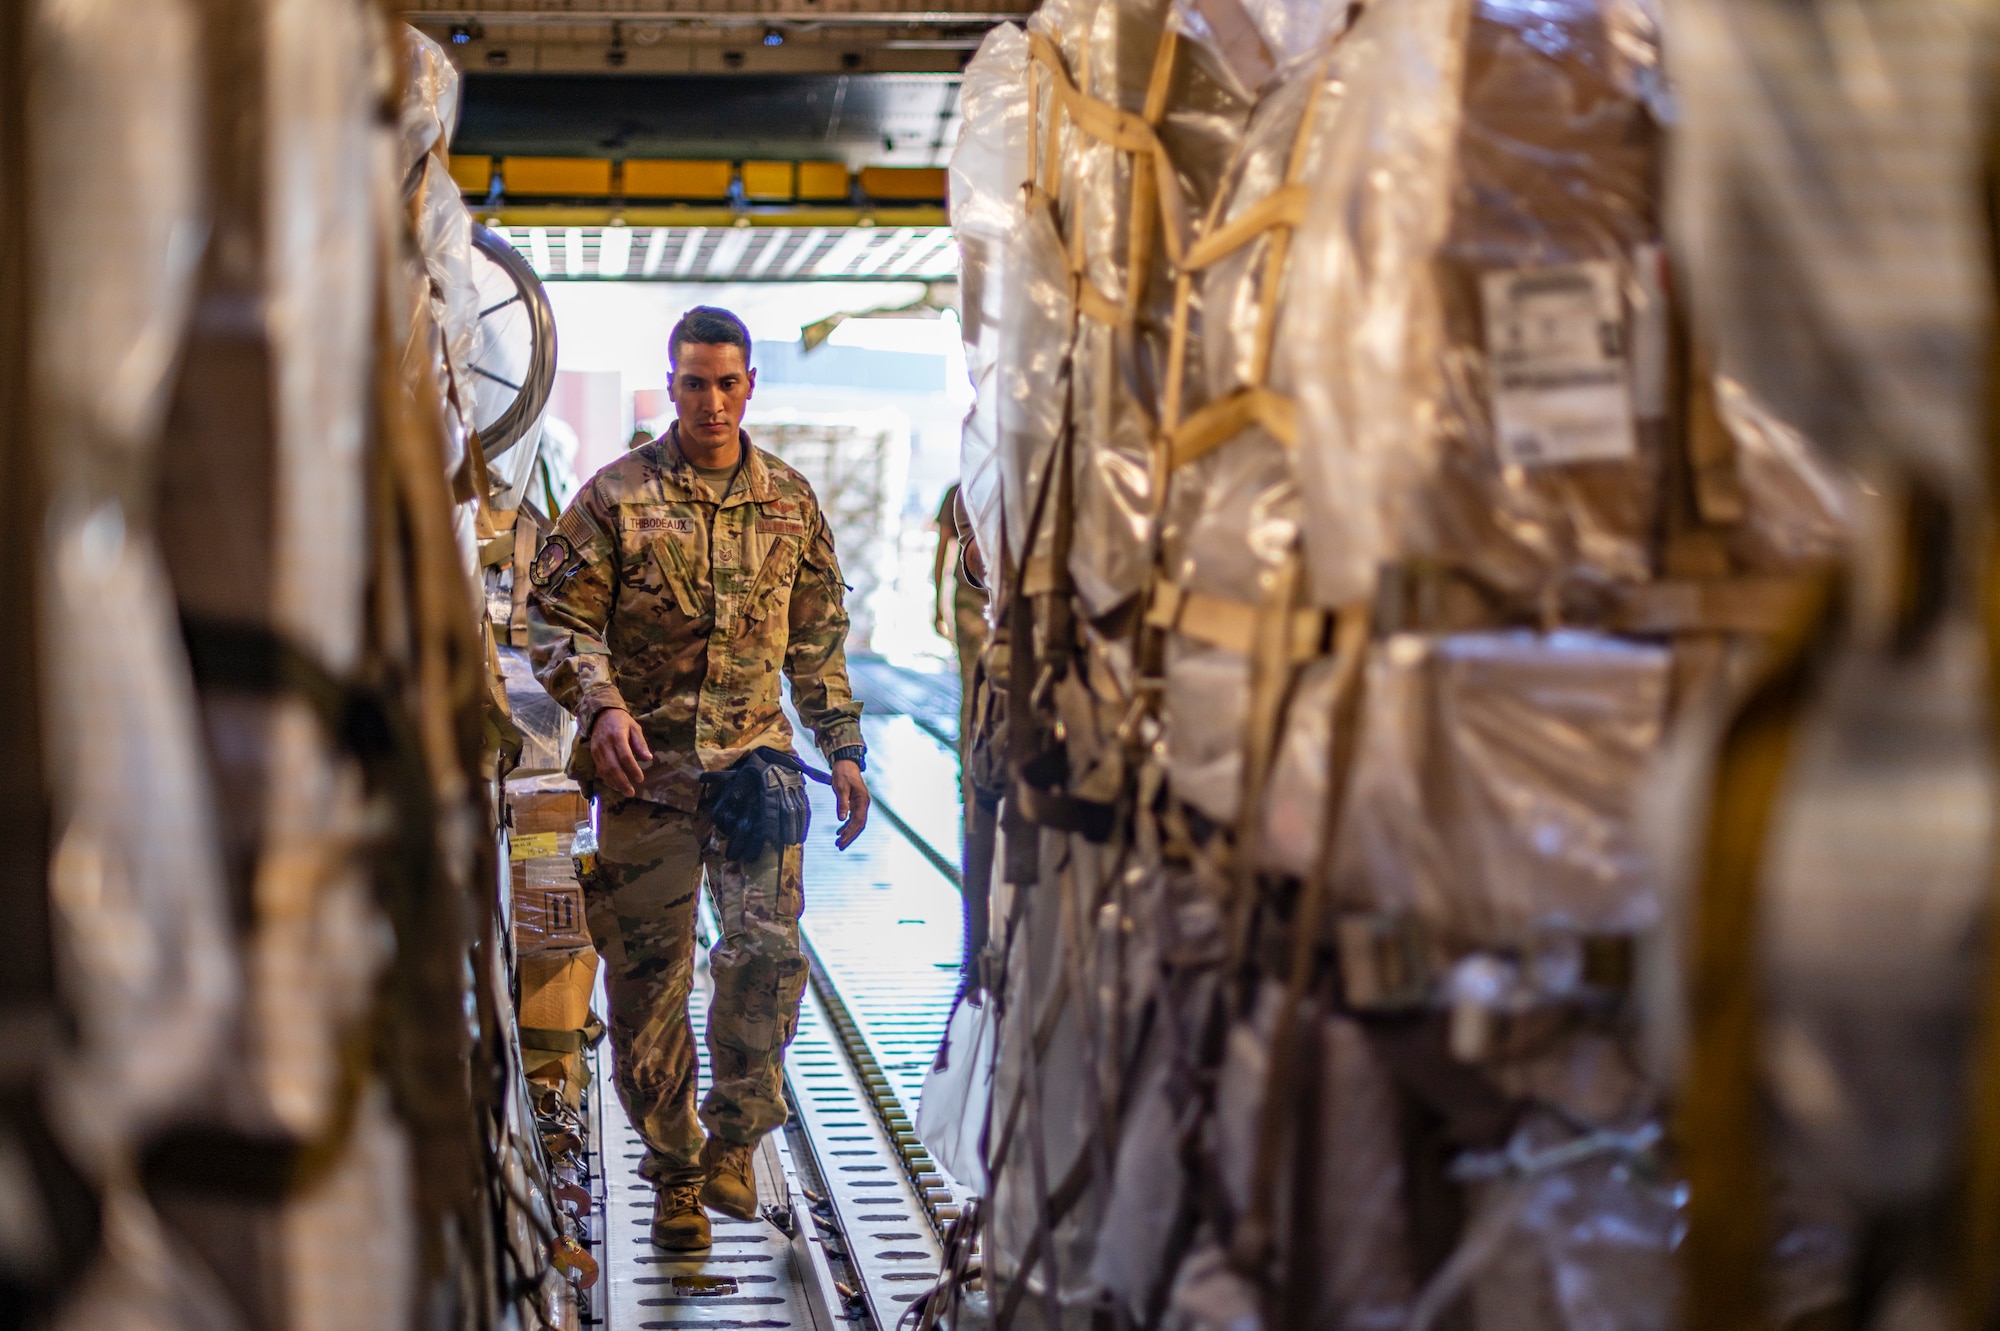 The C-5M delivered over 90,000 pounds of humanitarian aid through the Denton Program. The Denton Program allows private U.S. citizens and private organizations to transport humanitarian goods to approved countries in need.